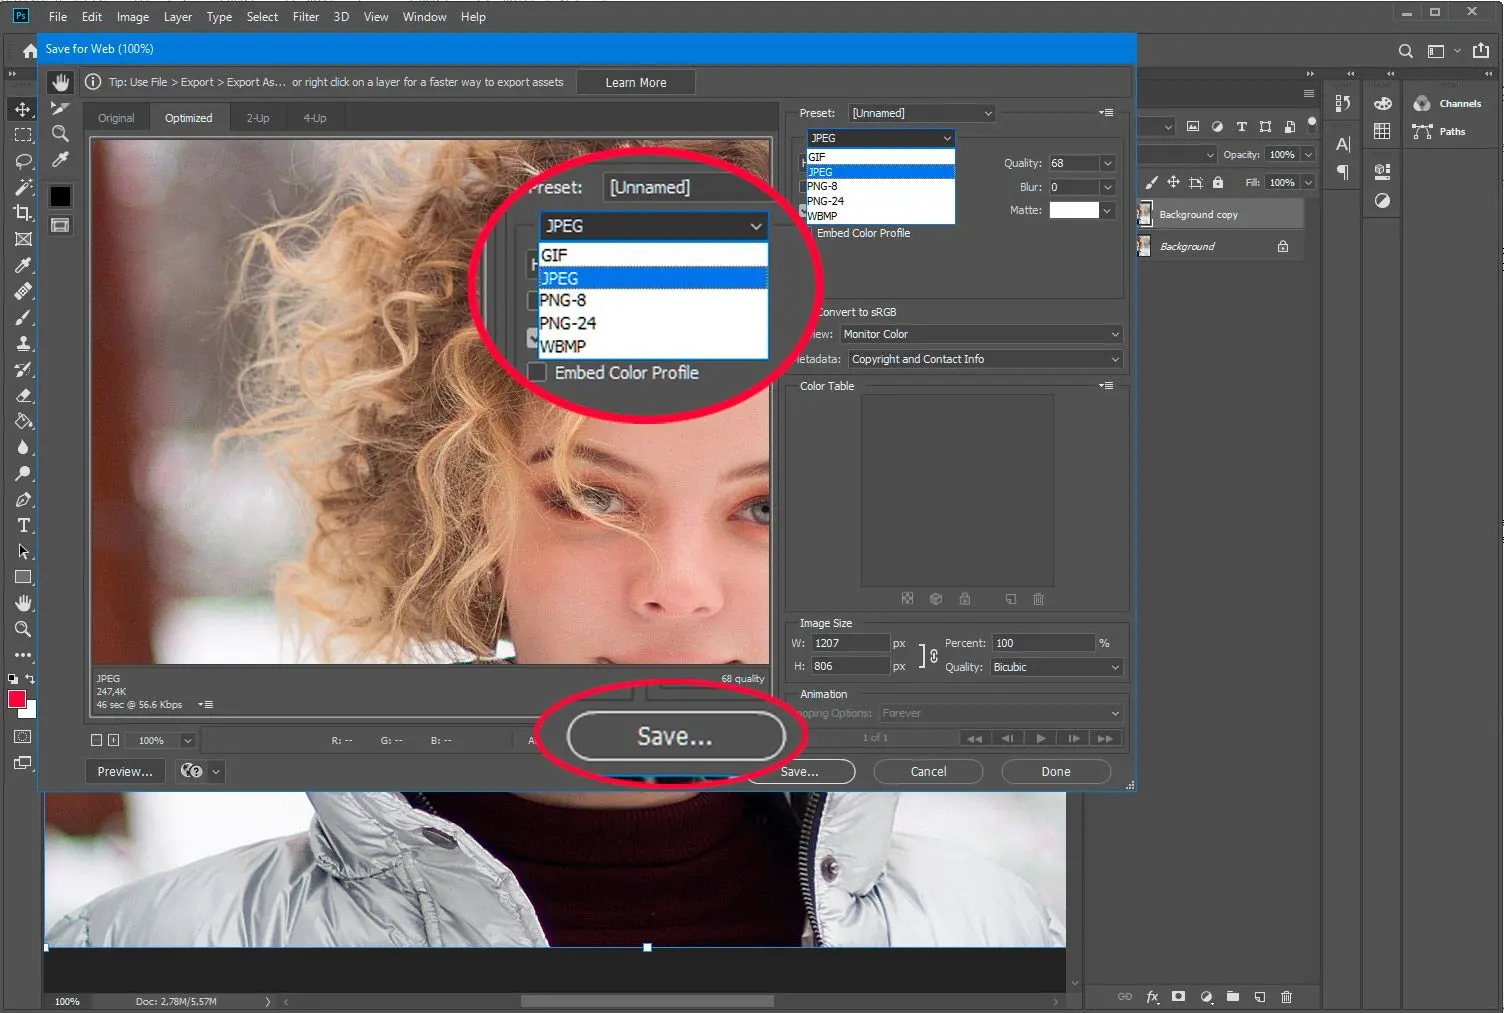 Adobe Photoshop. save PSD for web in jpg..